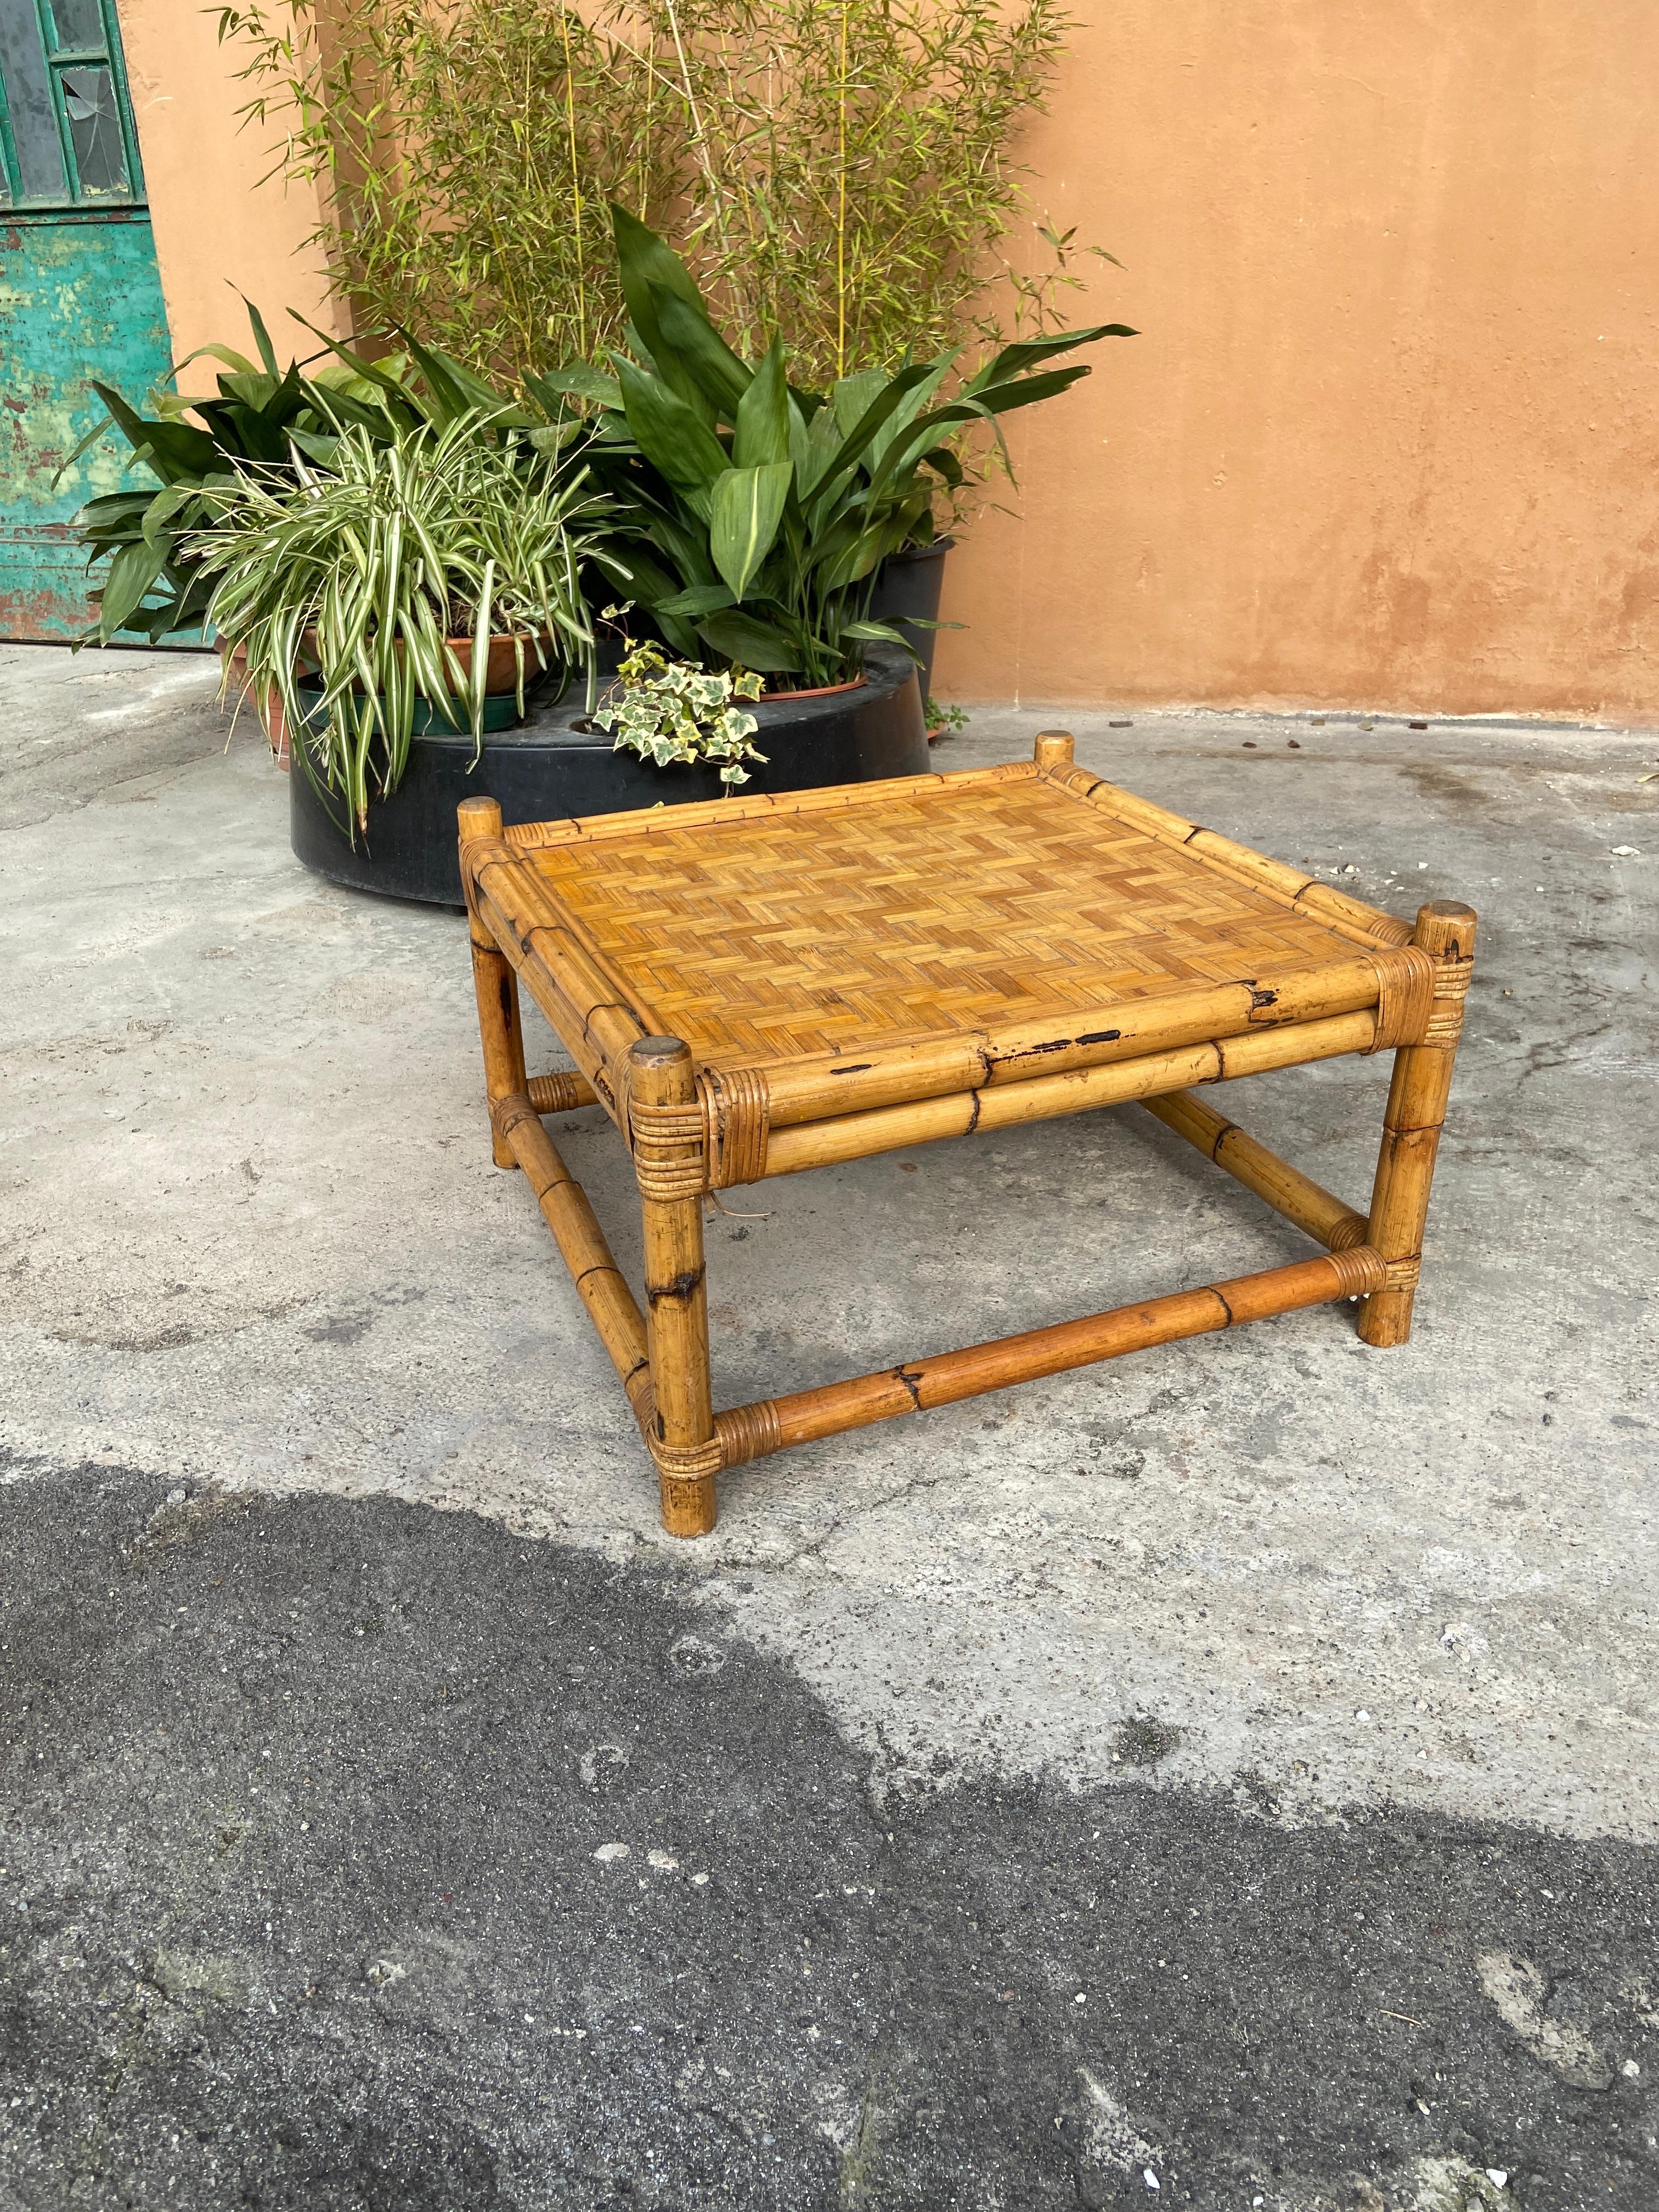 Mid-Century Modern Italian bamboo coffee table by Vivai del Sud. One of the laces on the top is broken but can be restored on demand.
The table can become a set with its sofa as shown in the photos.
Price for the set on request.
 